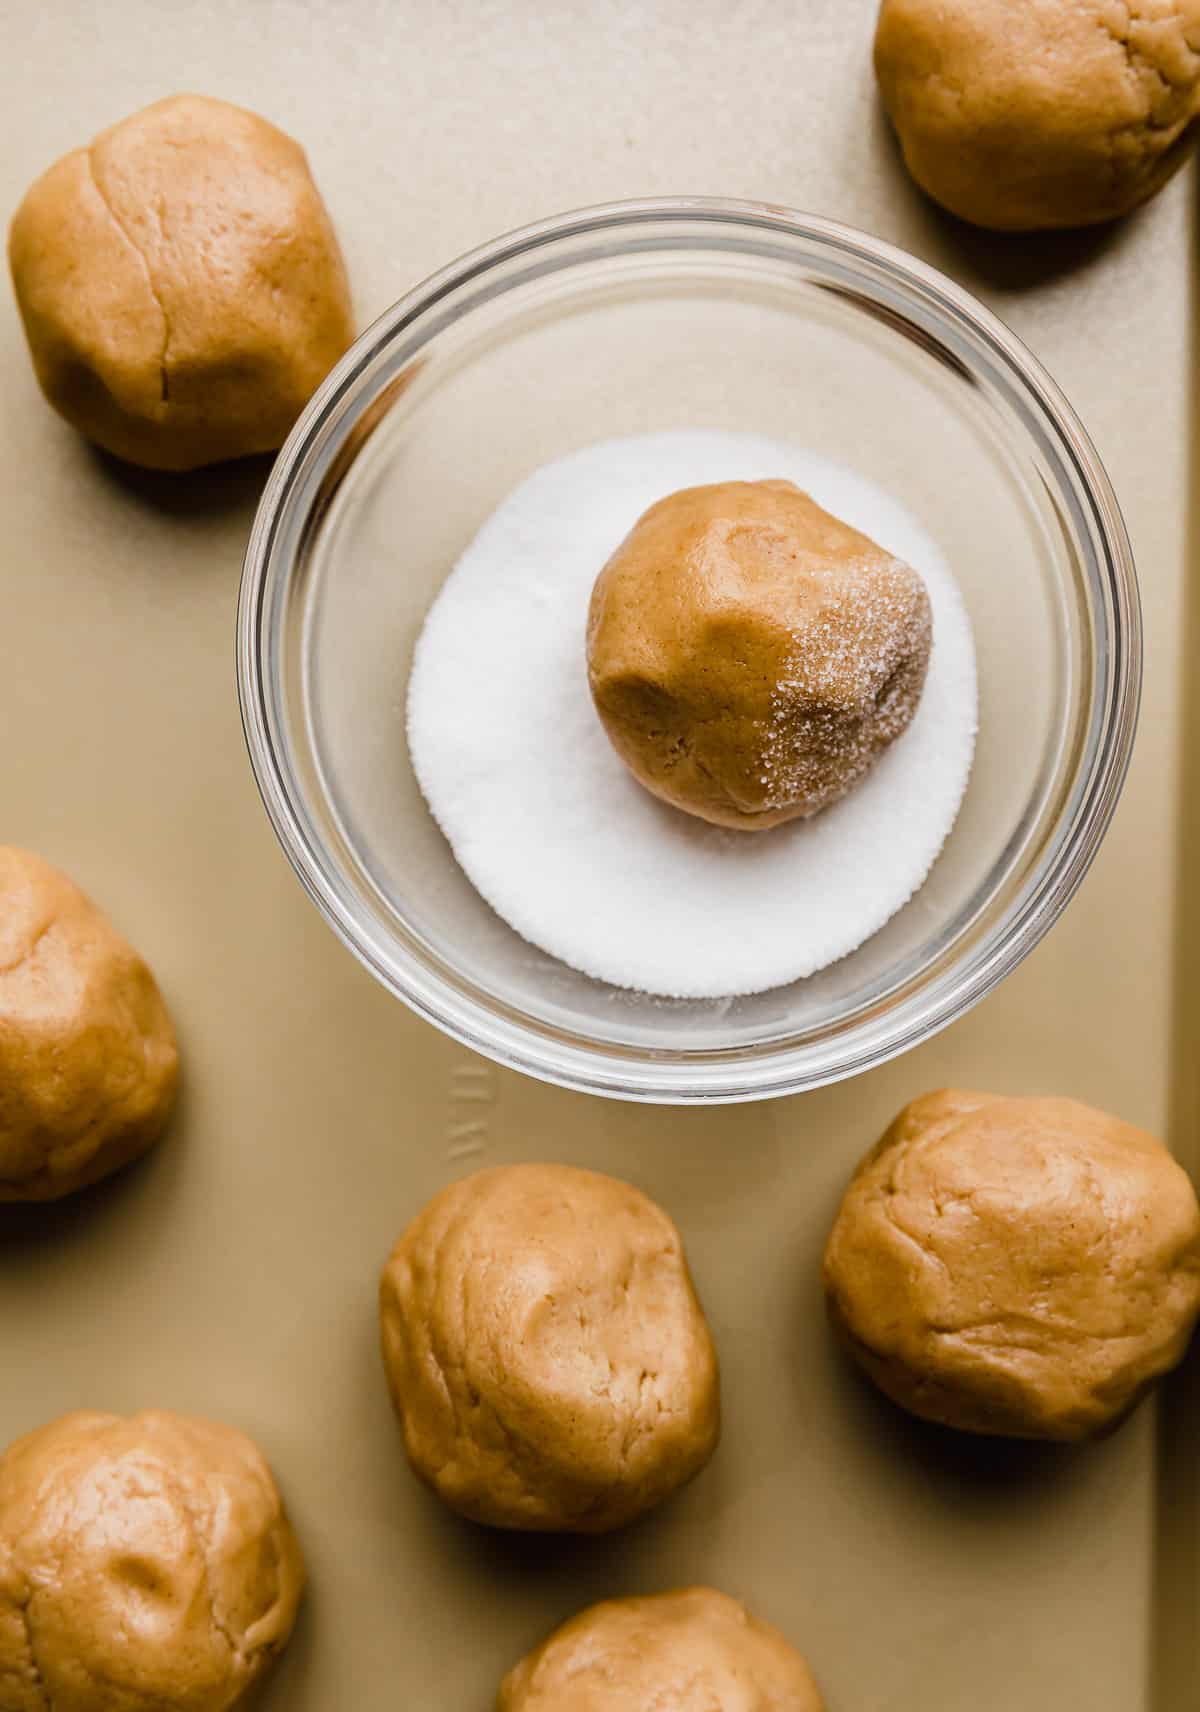 Light brown peanut butter cookies rolled in balls with one ball in a glass bowl that's filled with white sugar.